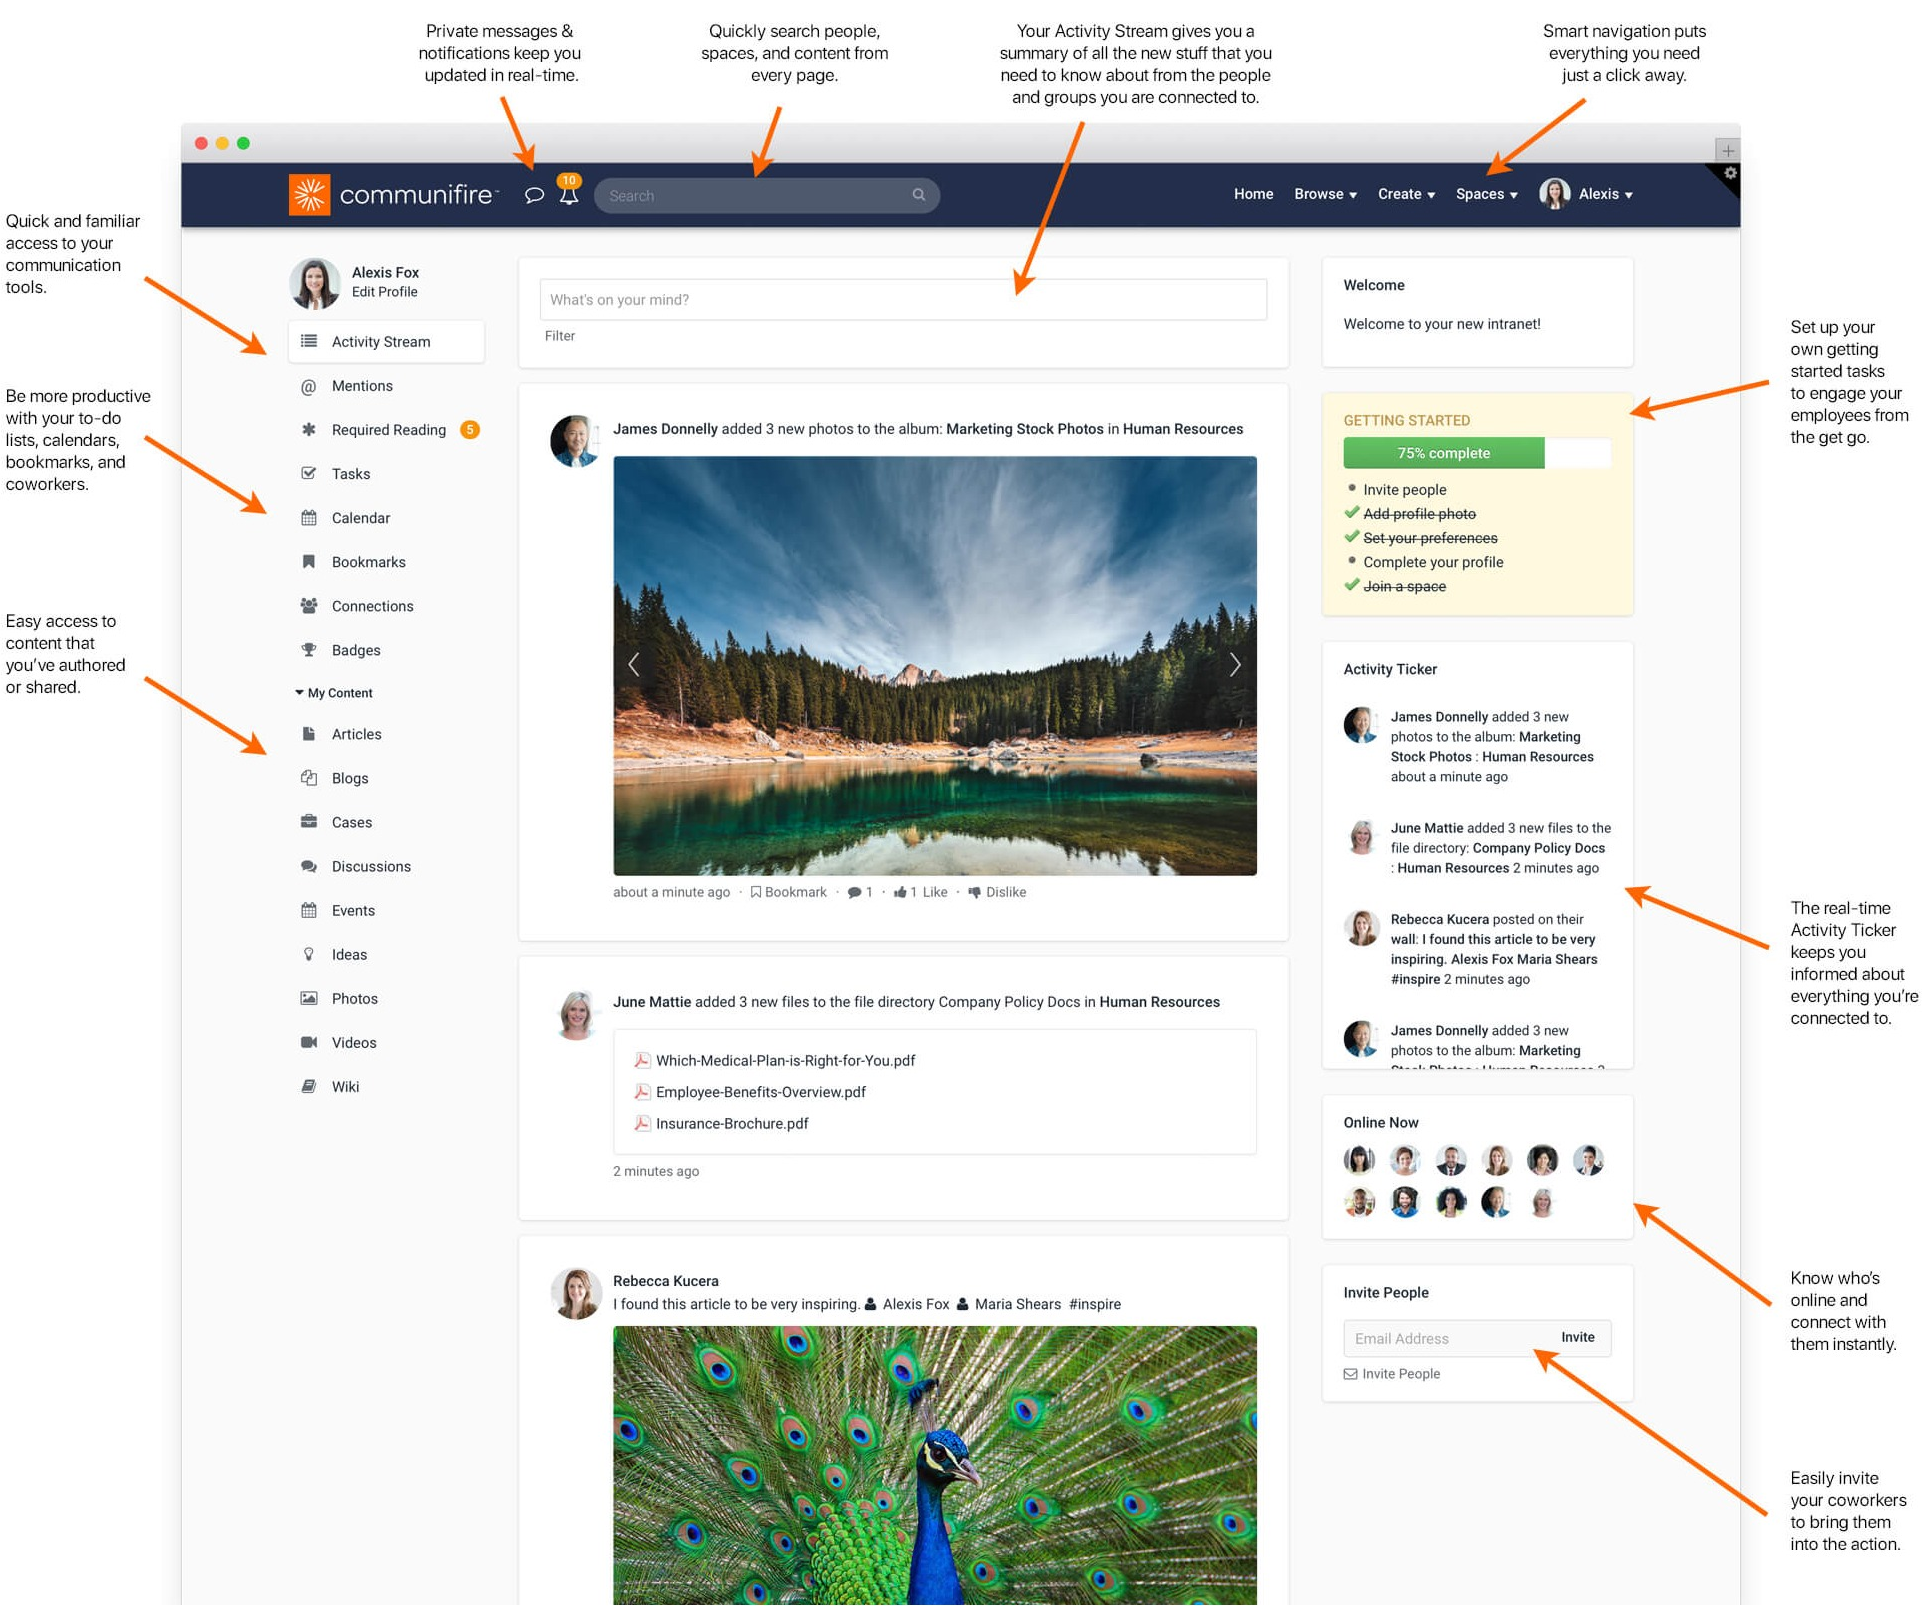 intranet and extranet - activity stream